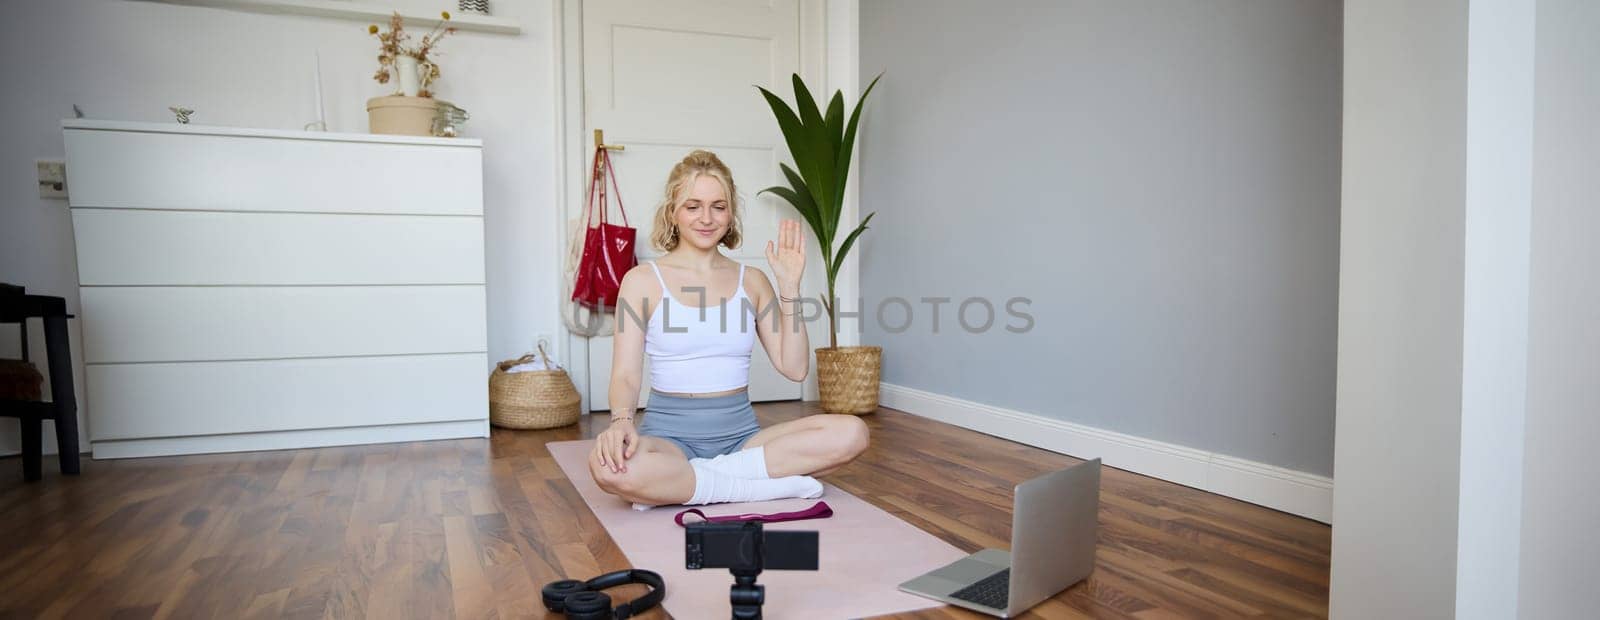 Portrait of young female athlete, fitness trainer recording vlog, training session on digital camera, sitting in a room on rubber yoga mat, showing exercises.